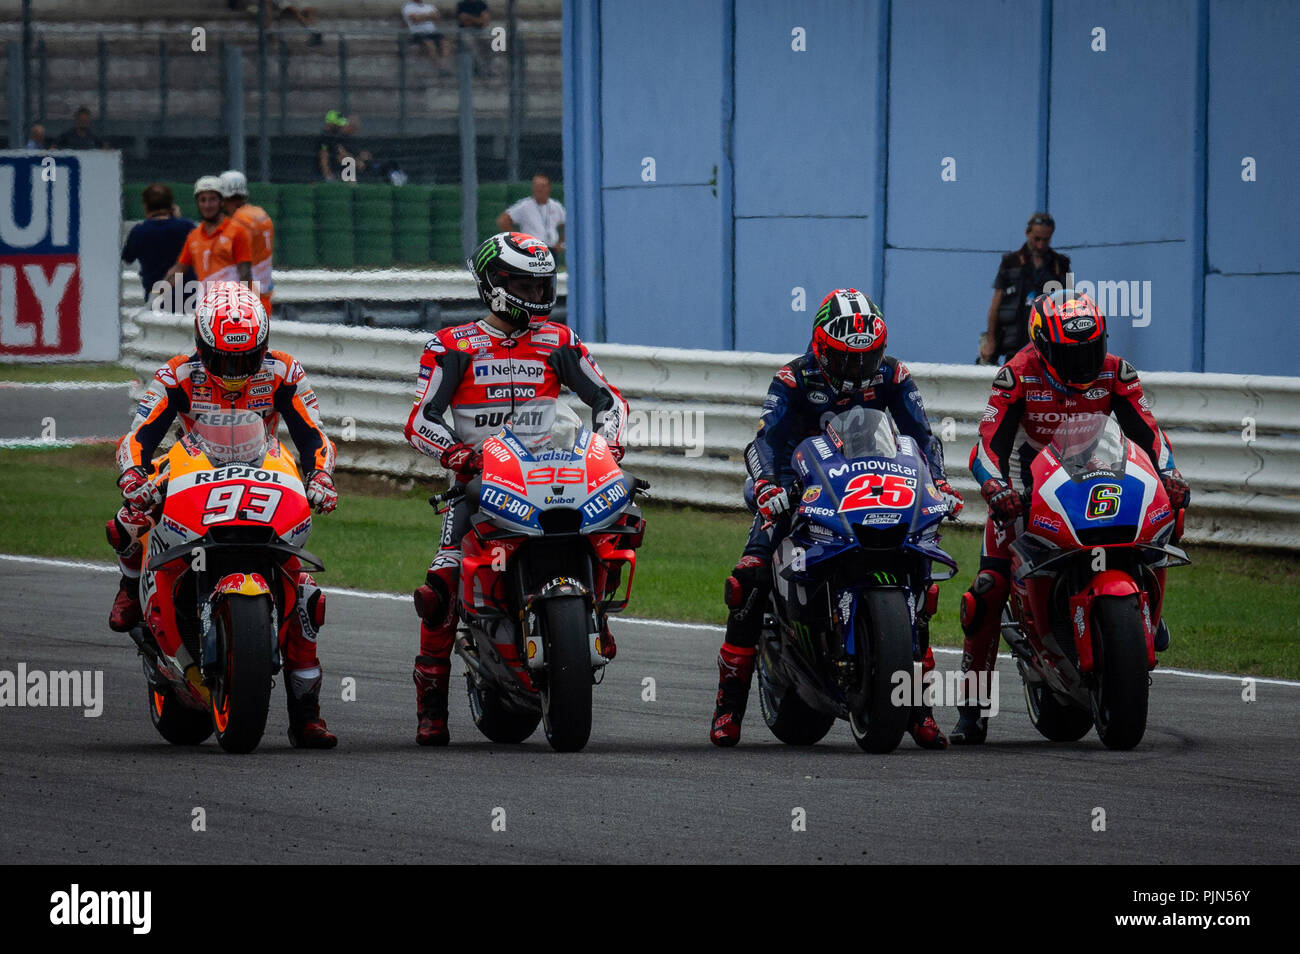 Misano Adriatico, Italy. 07th Sep, 2018. MotoGP riders during Friday FP2 in Misano Credit: Lorenzo Di Cola/Pacific Press/Alamy Live News Stock Photo